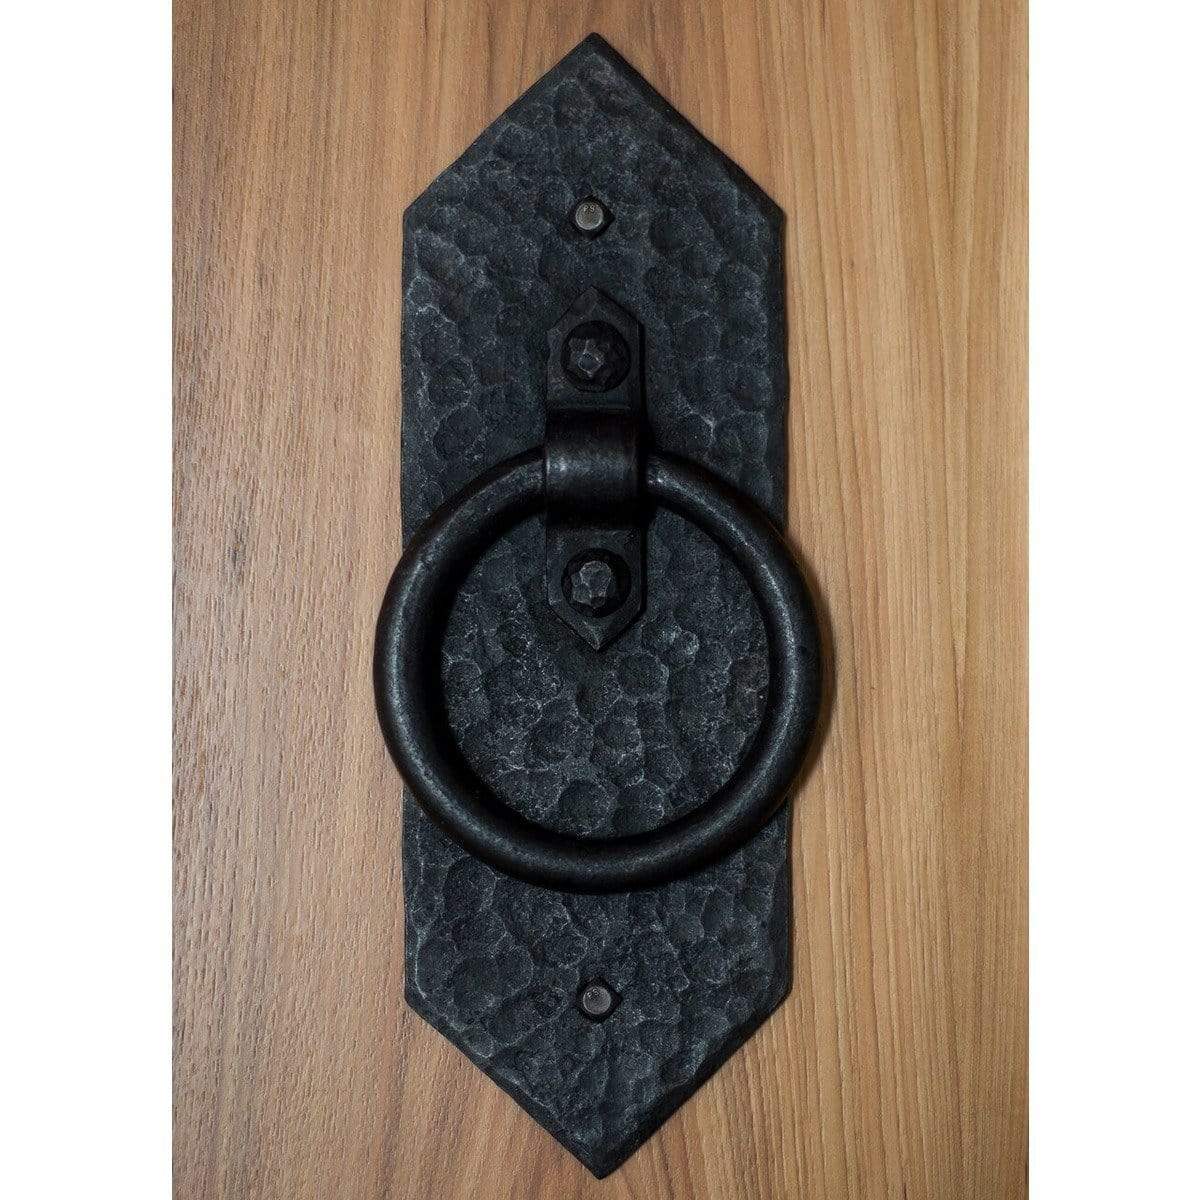 Hand Forged Diamond Rustic Ring Door Pull - Sliding Barn Door Hardware by RealCraft